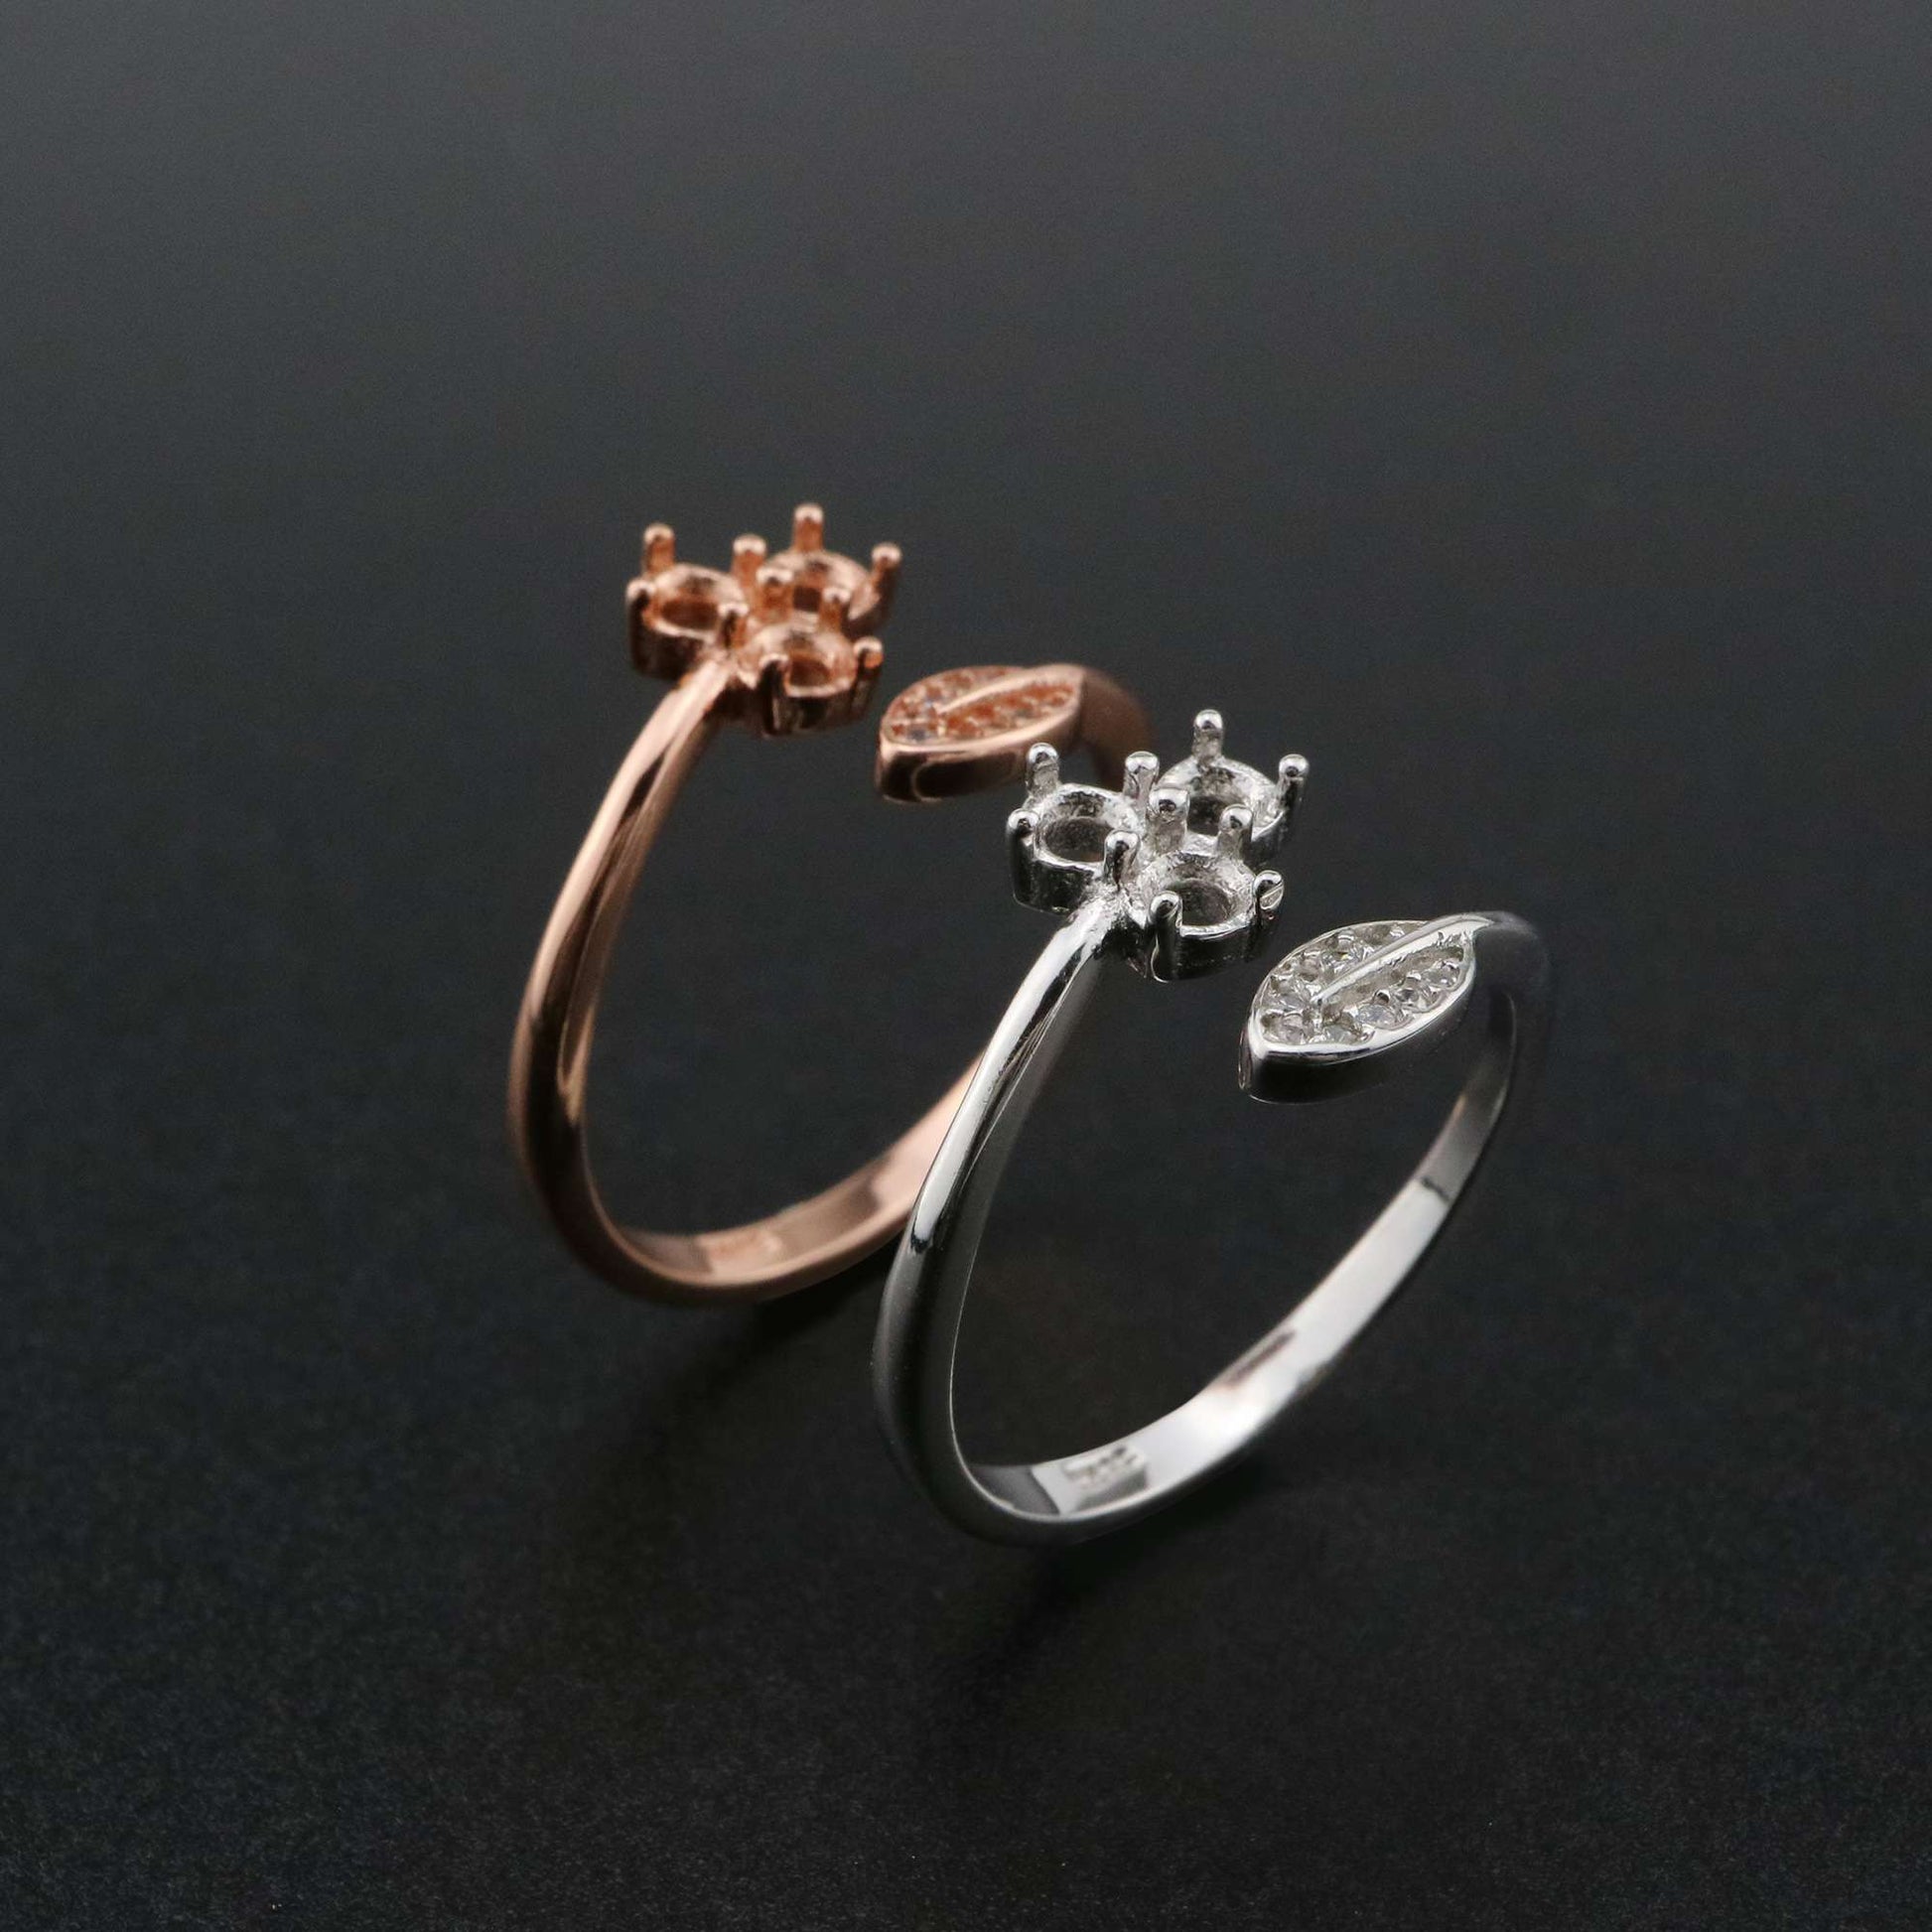 One silver and one rose gold bypass rings setting with a leaf on one side and a semi mount for three small round gems on the other.